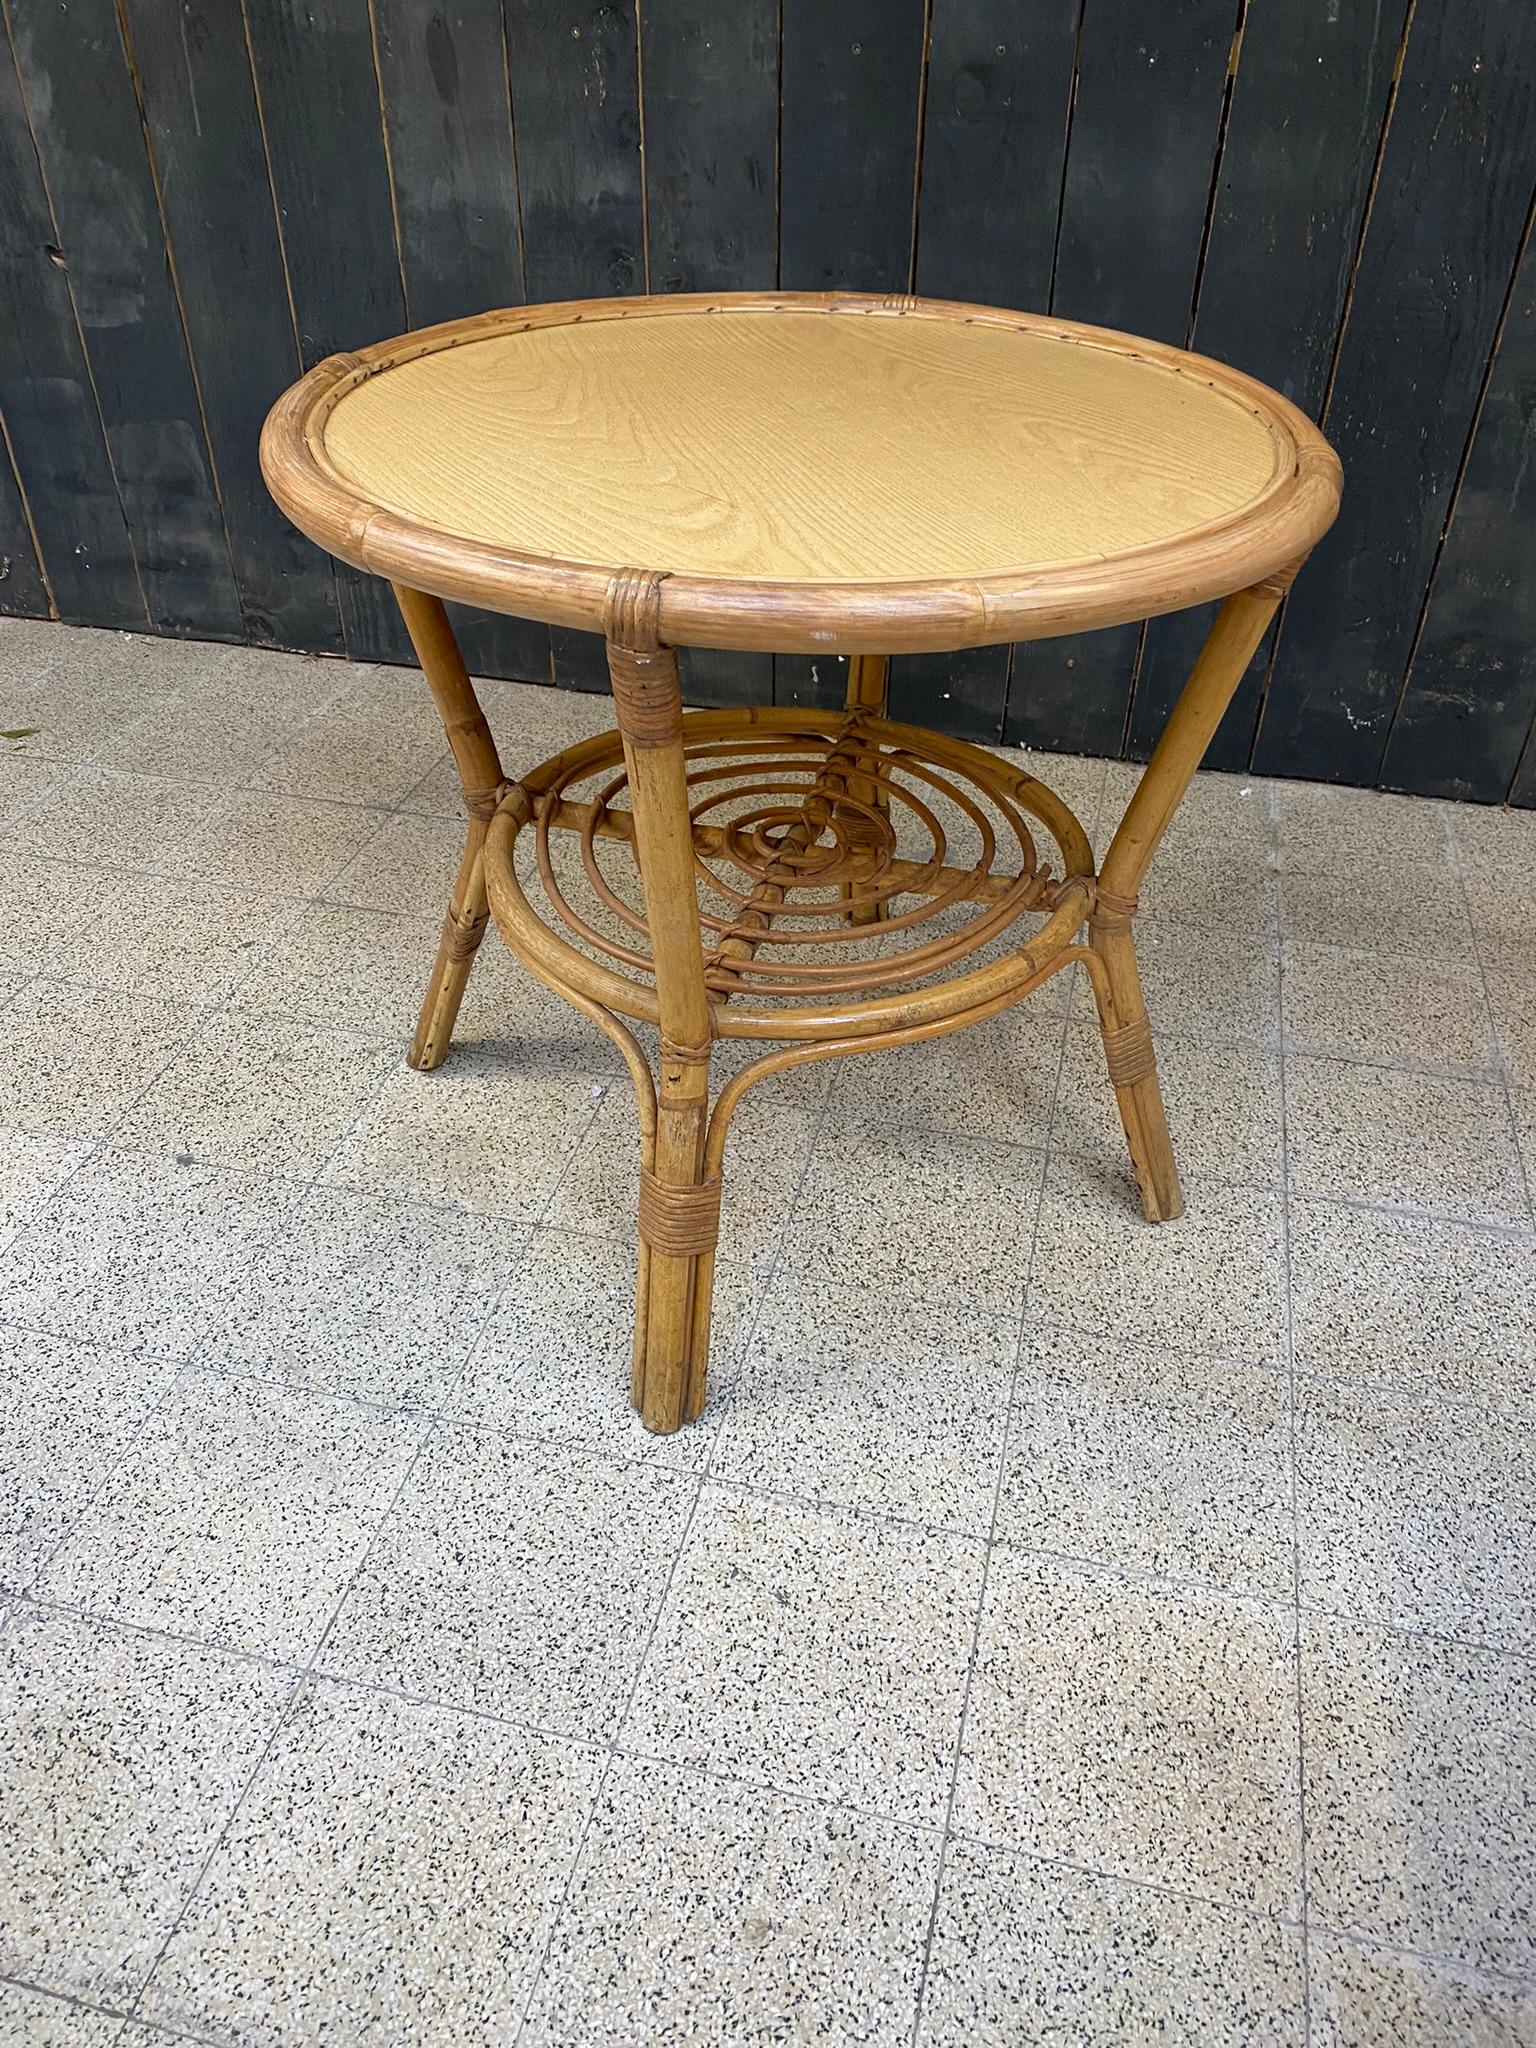 Mid-20th Century Bamboo Table, circa 1960-1970 For Sale